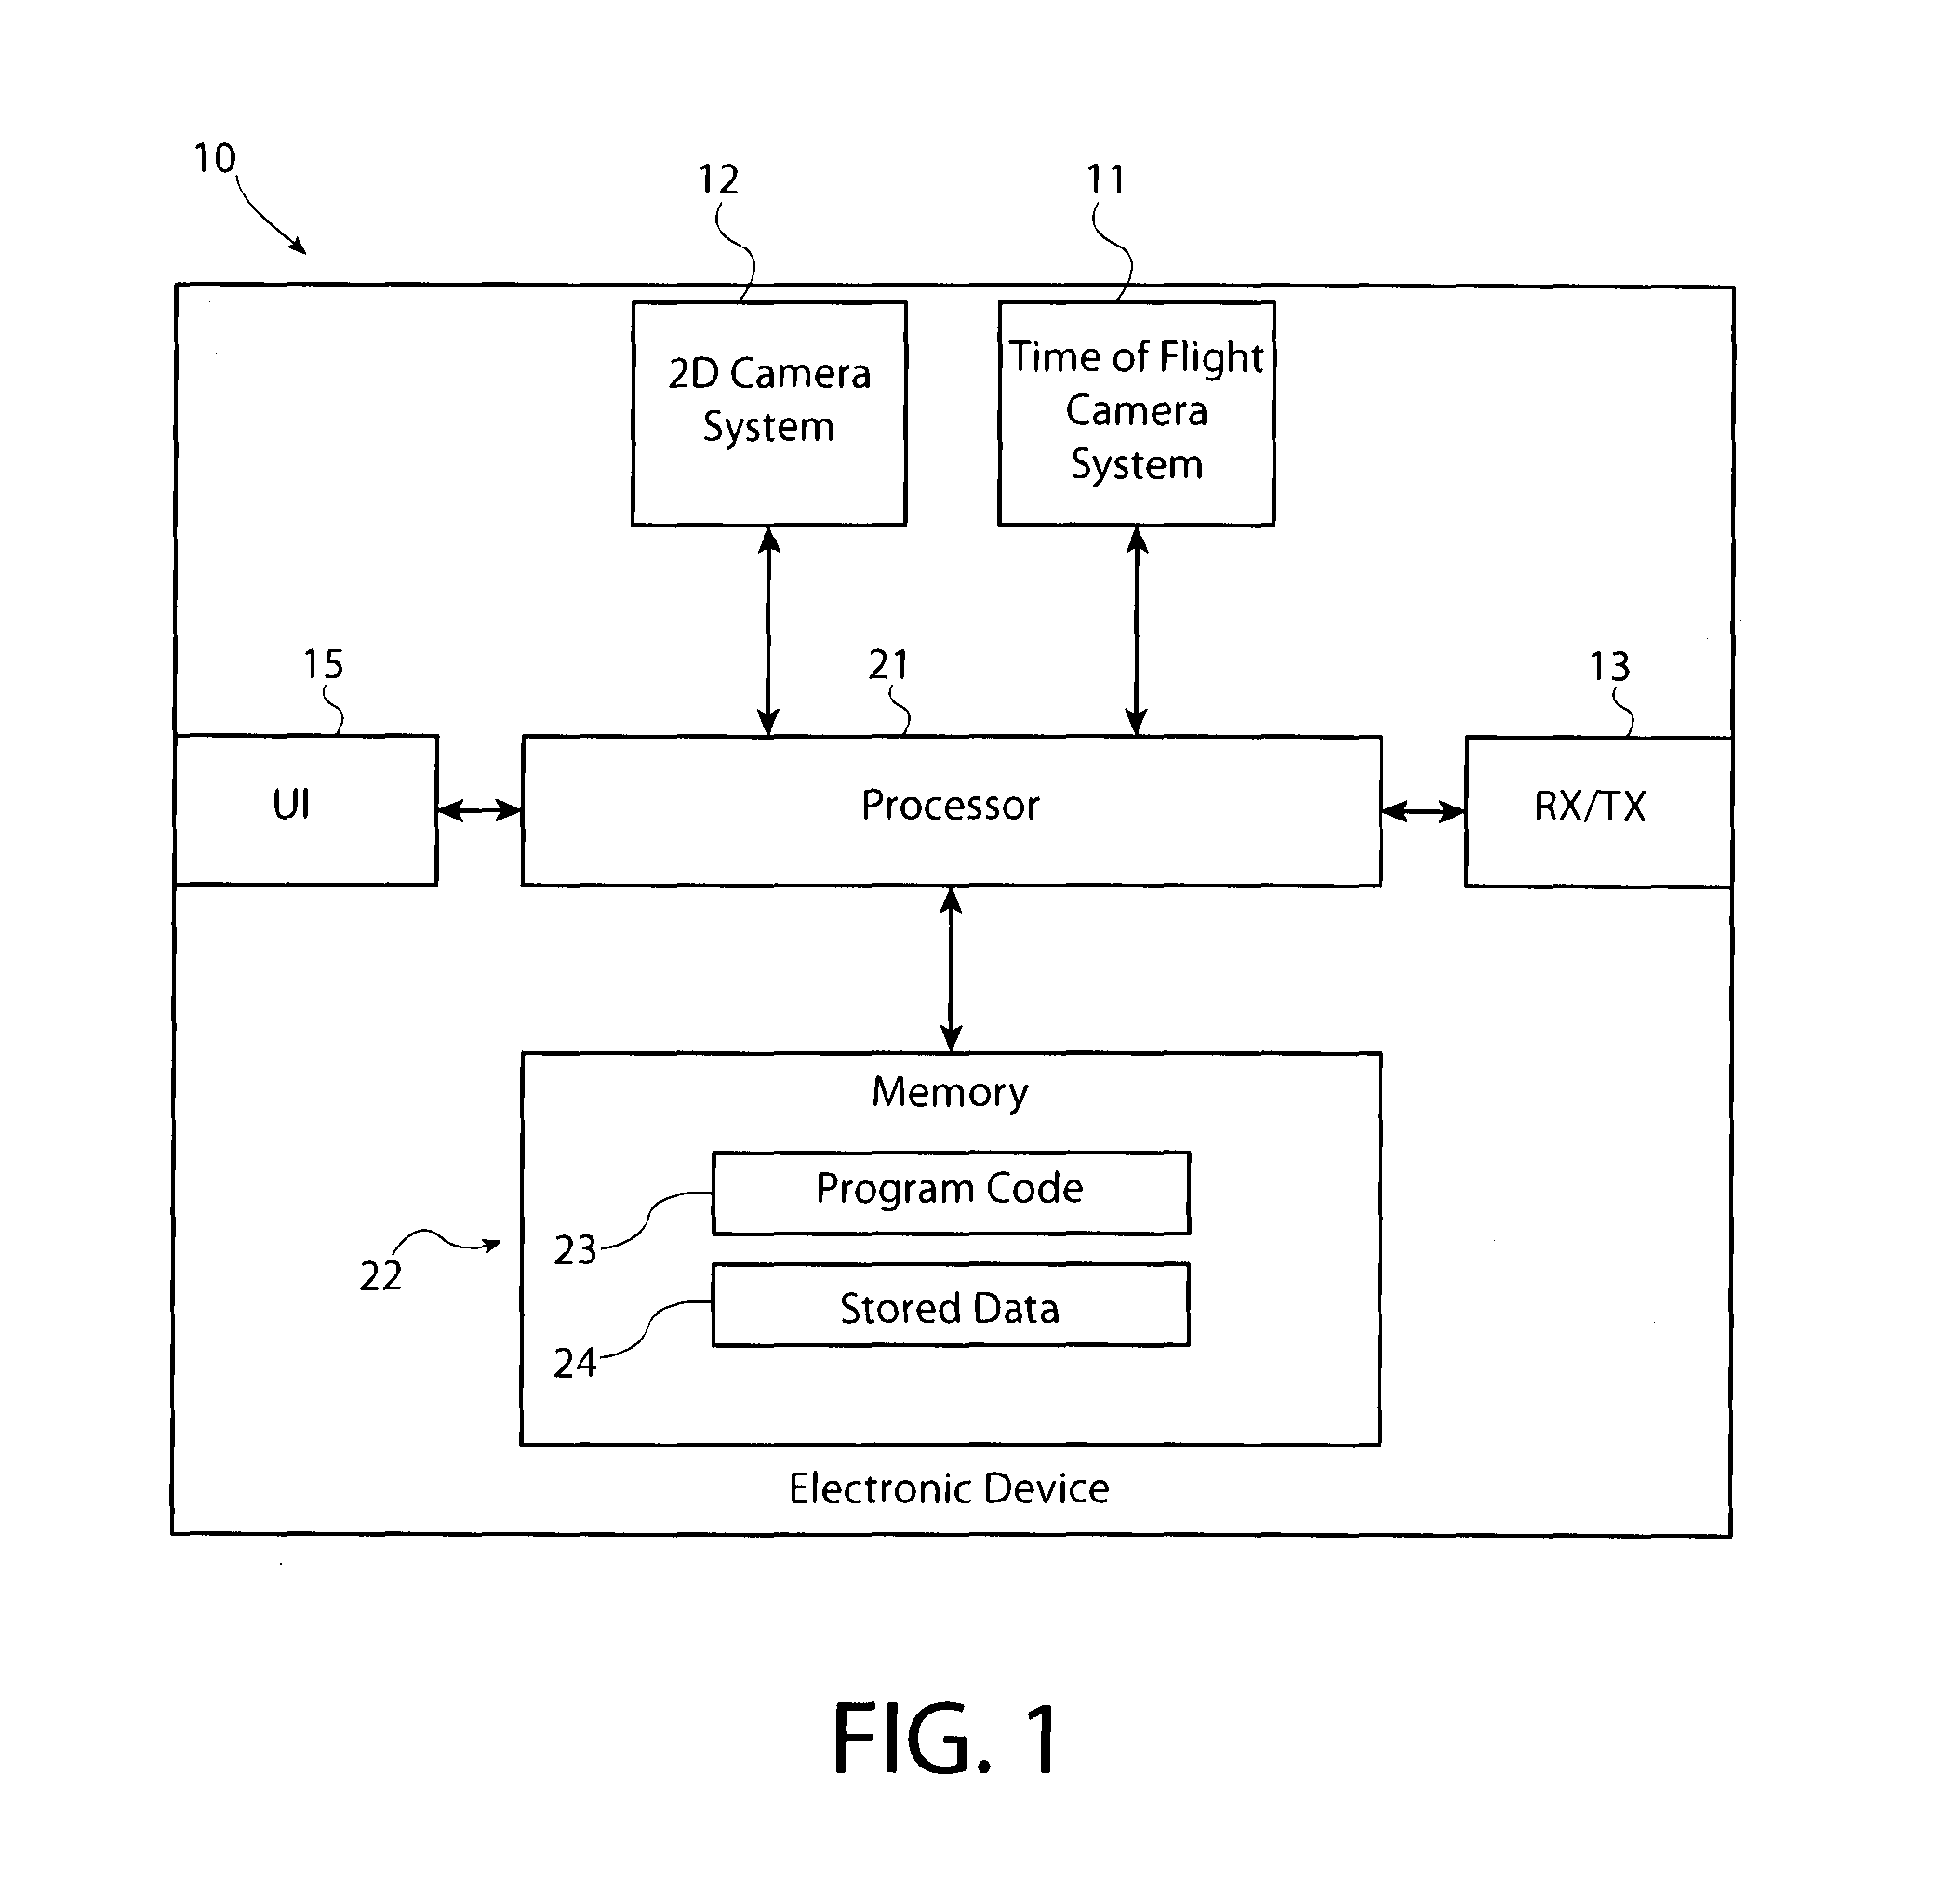 Method and apparatus for fusing distance data from a distance sensing camera with an image